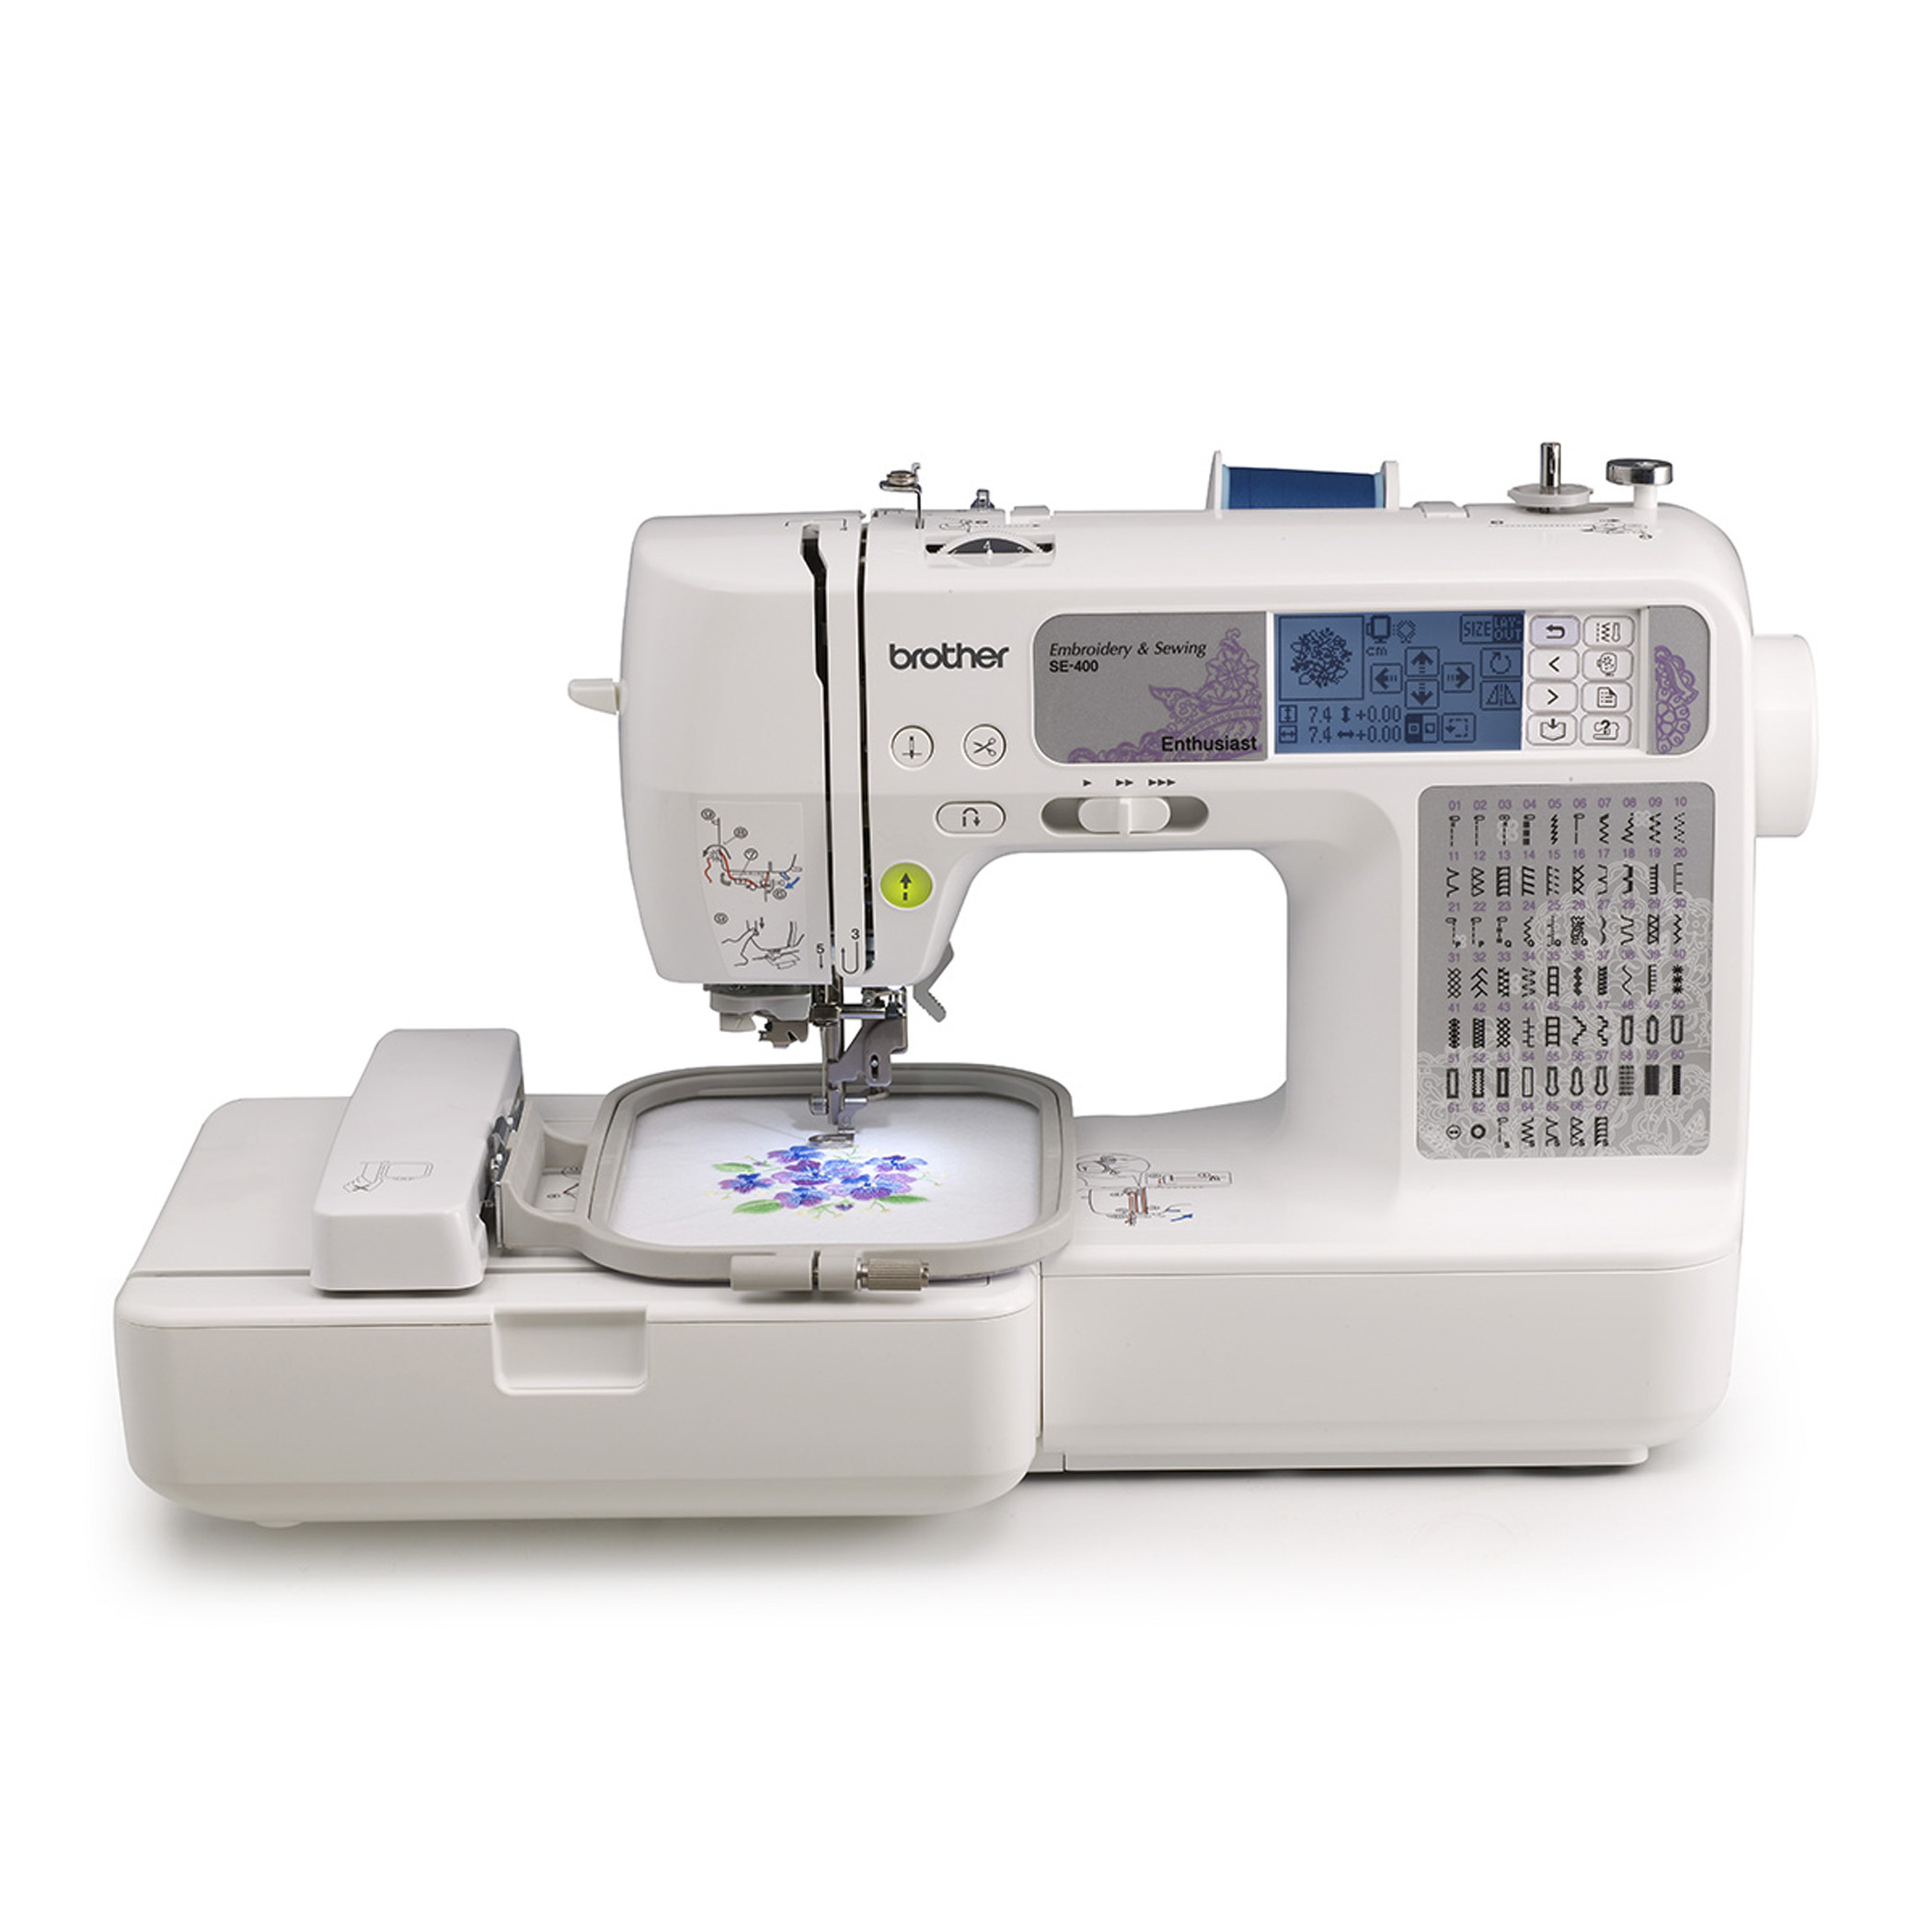 Brother SE-400 Computerized Sewing & Embroidery Machine - image 1 of 4